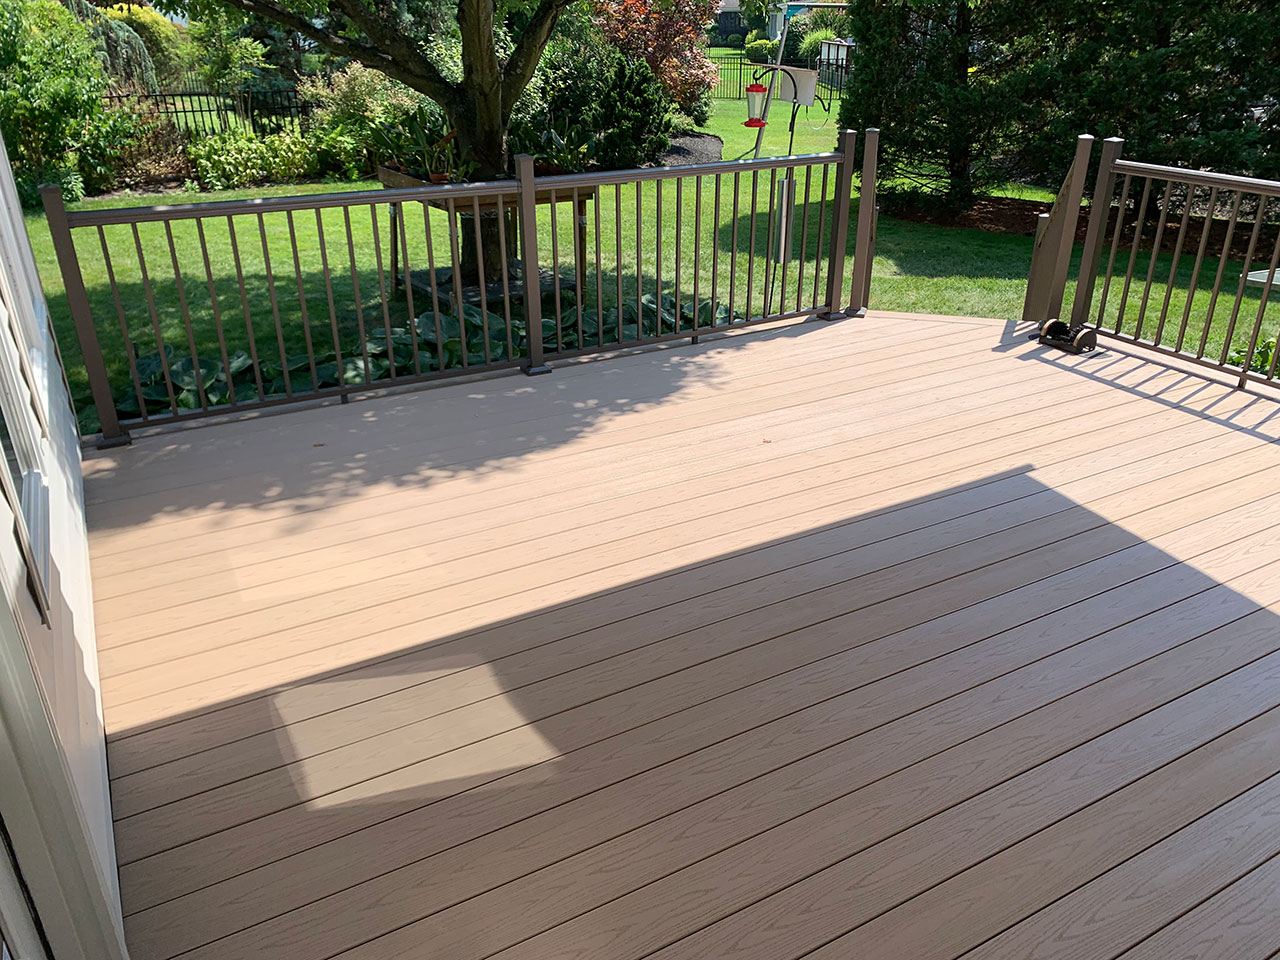 Morrestown Azek Deck Harvest collection with RDI Bronze Railing - After